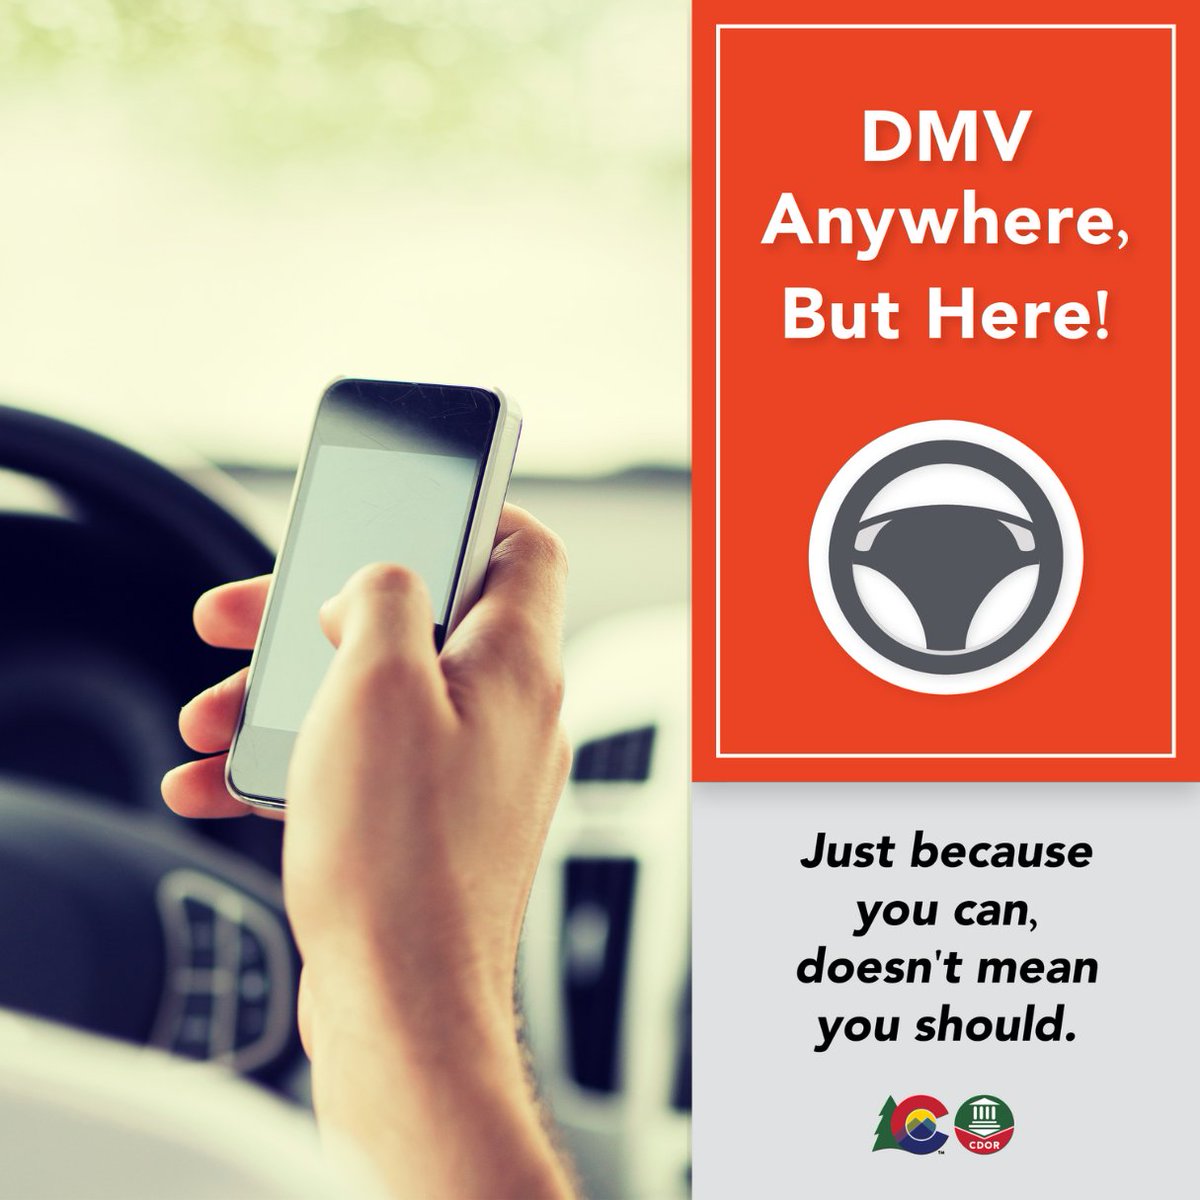 While you can DMV in the car, we suggest you keep your eyes on the road! #JustBecauseYouCan #DriveSafe